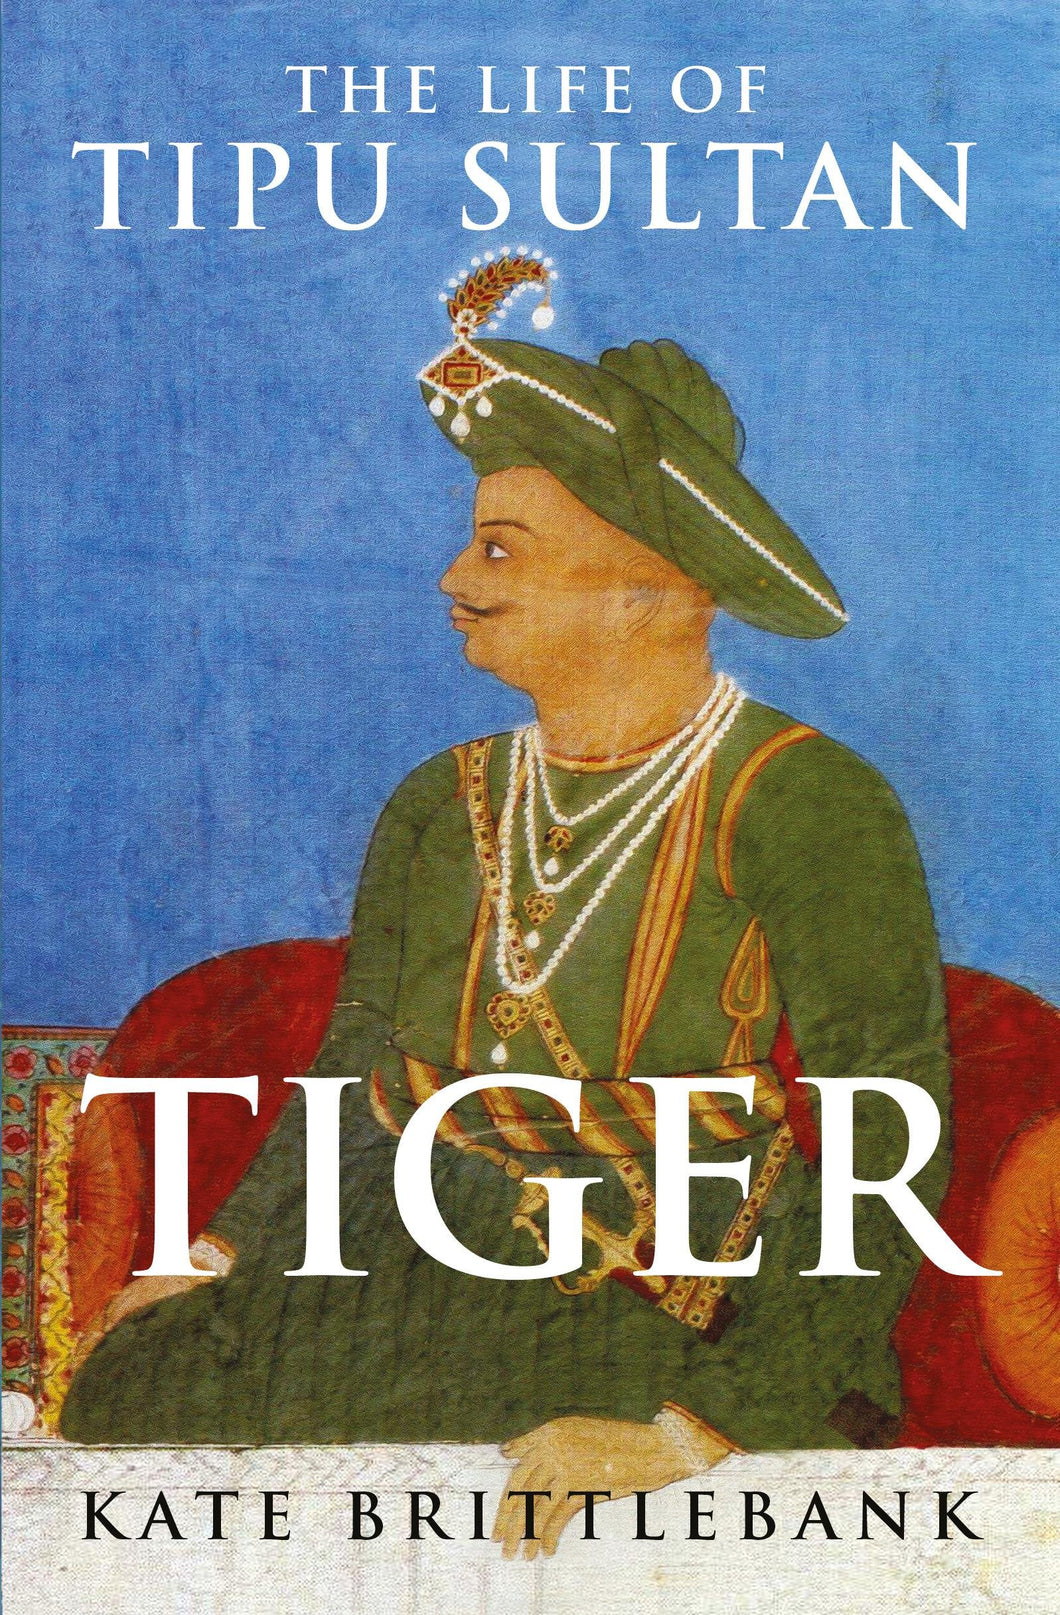 TIGER,THE LIFE OF TIPU SULTAN